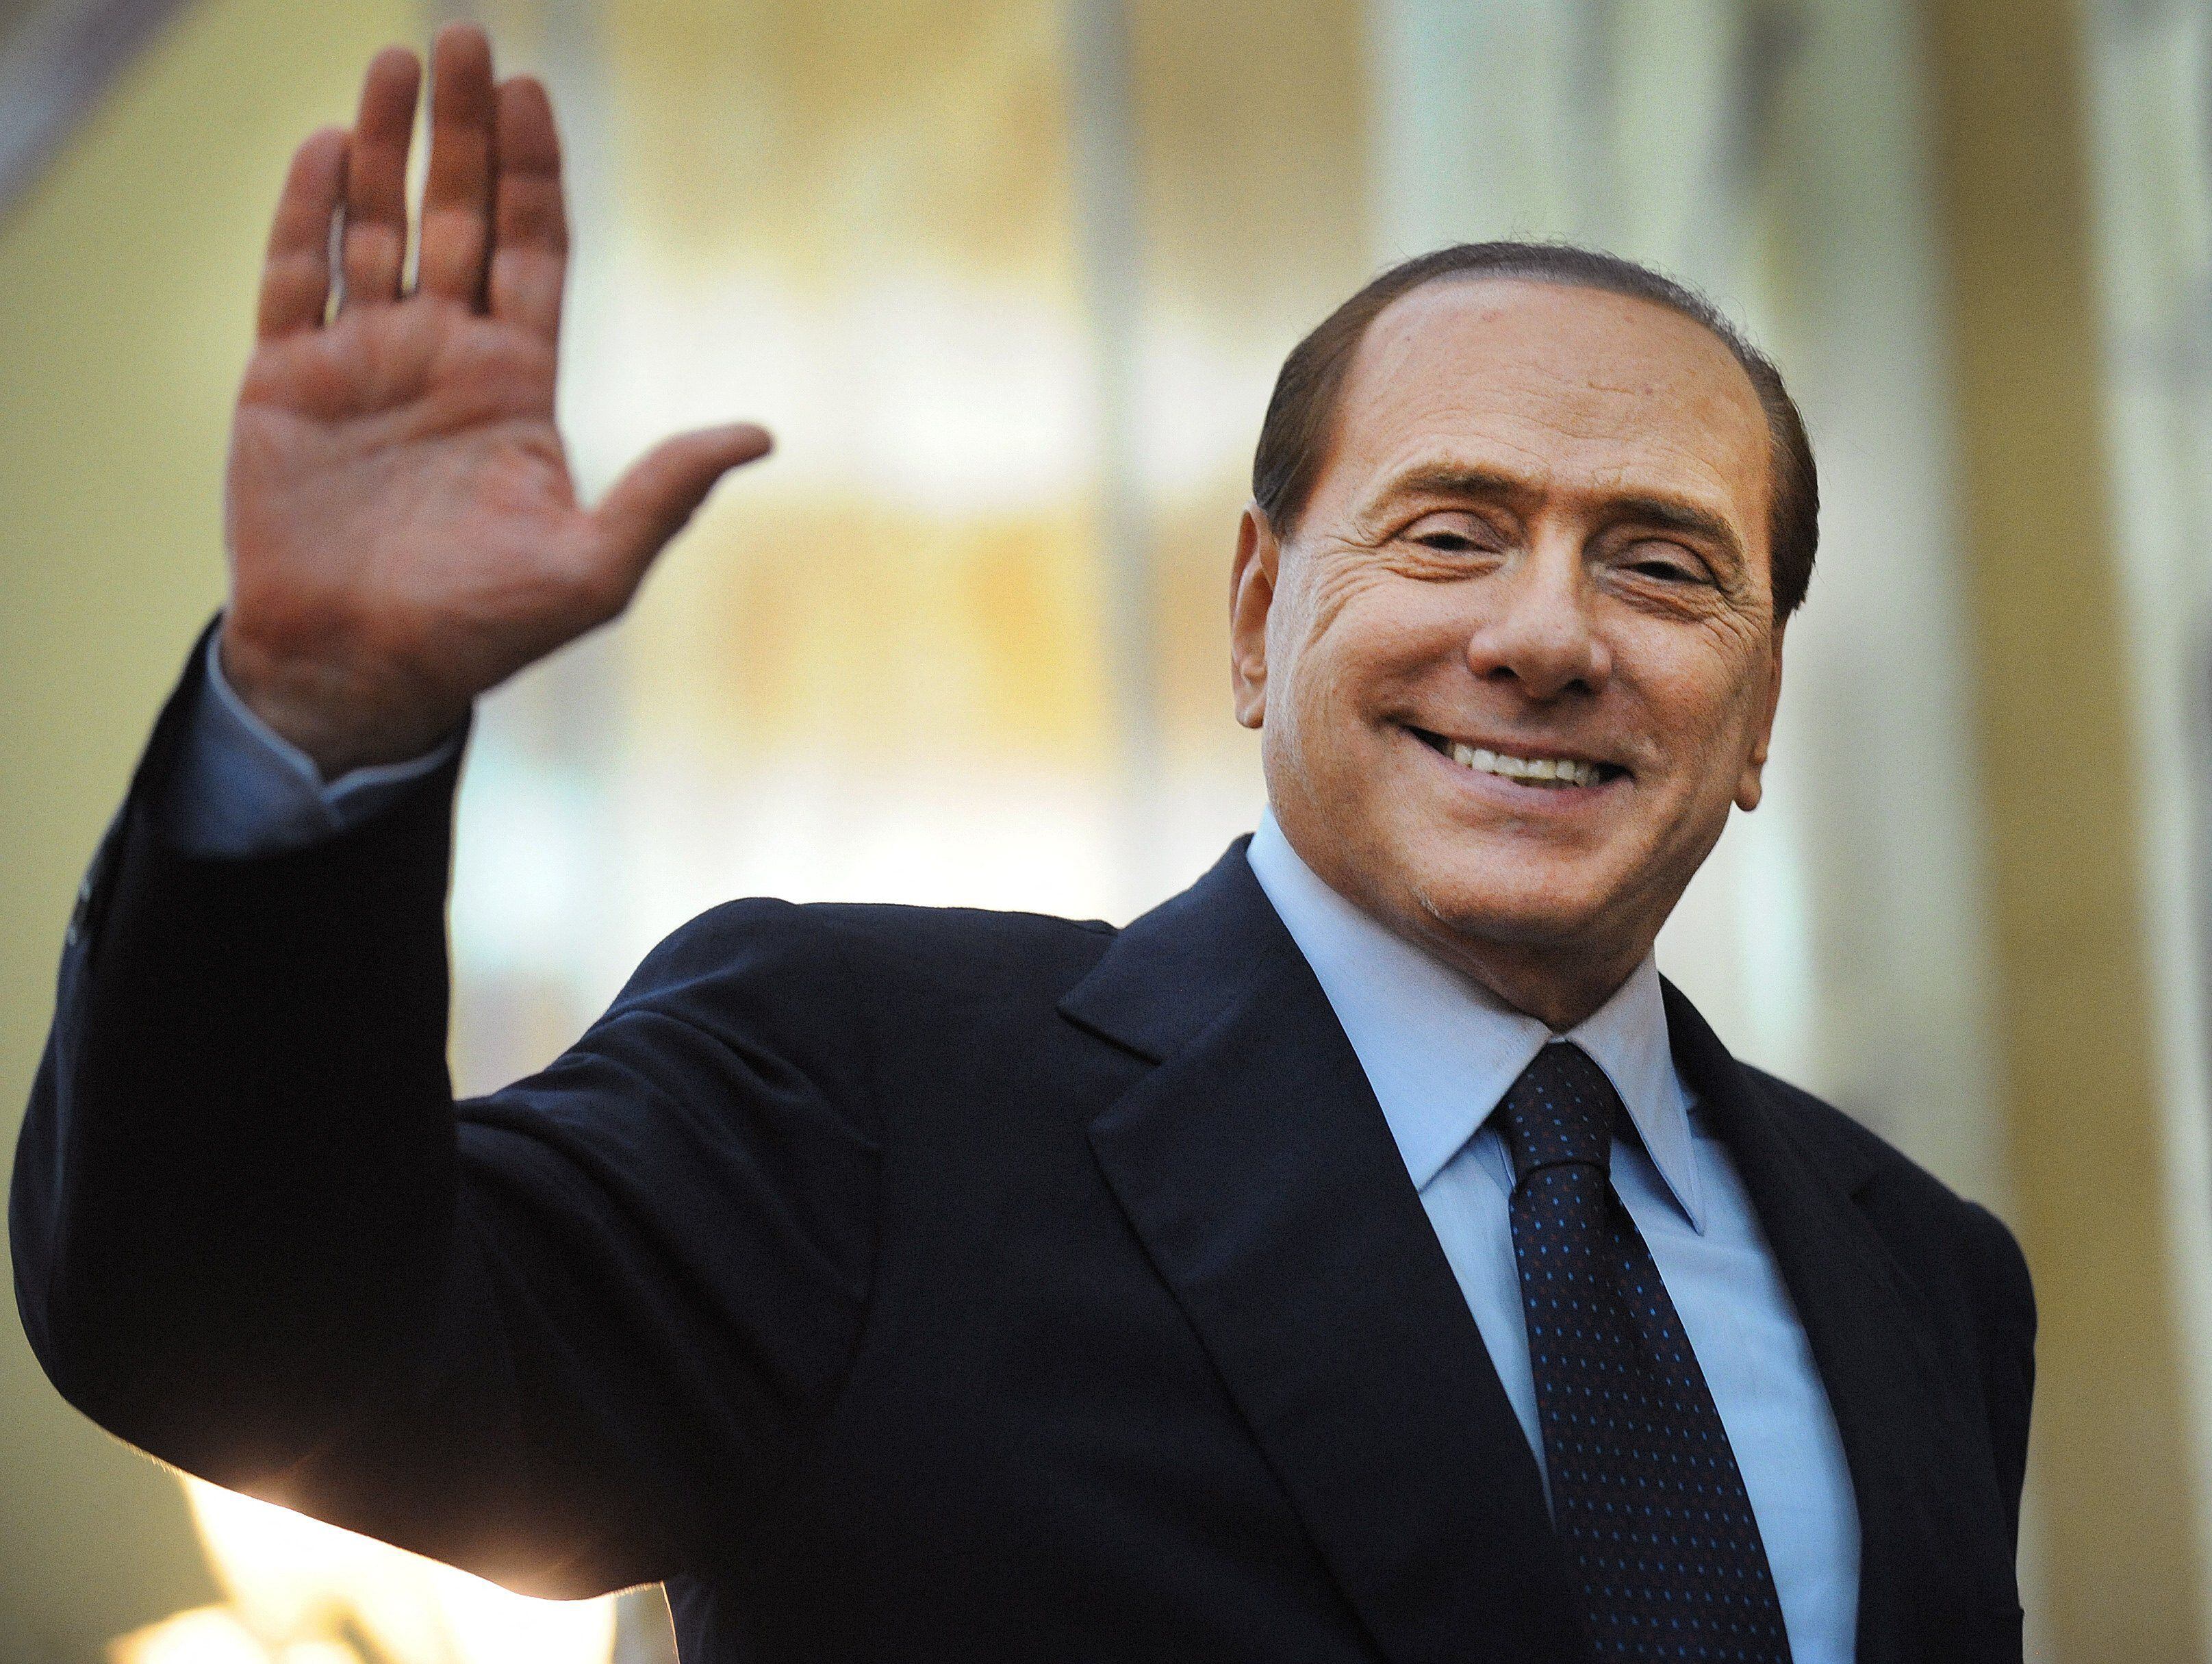 Berlusconi, the first populist who paved the way for Trump and Bolsonaro